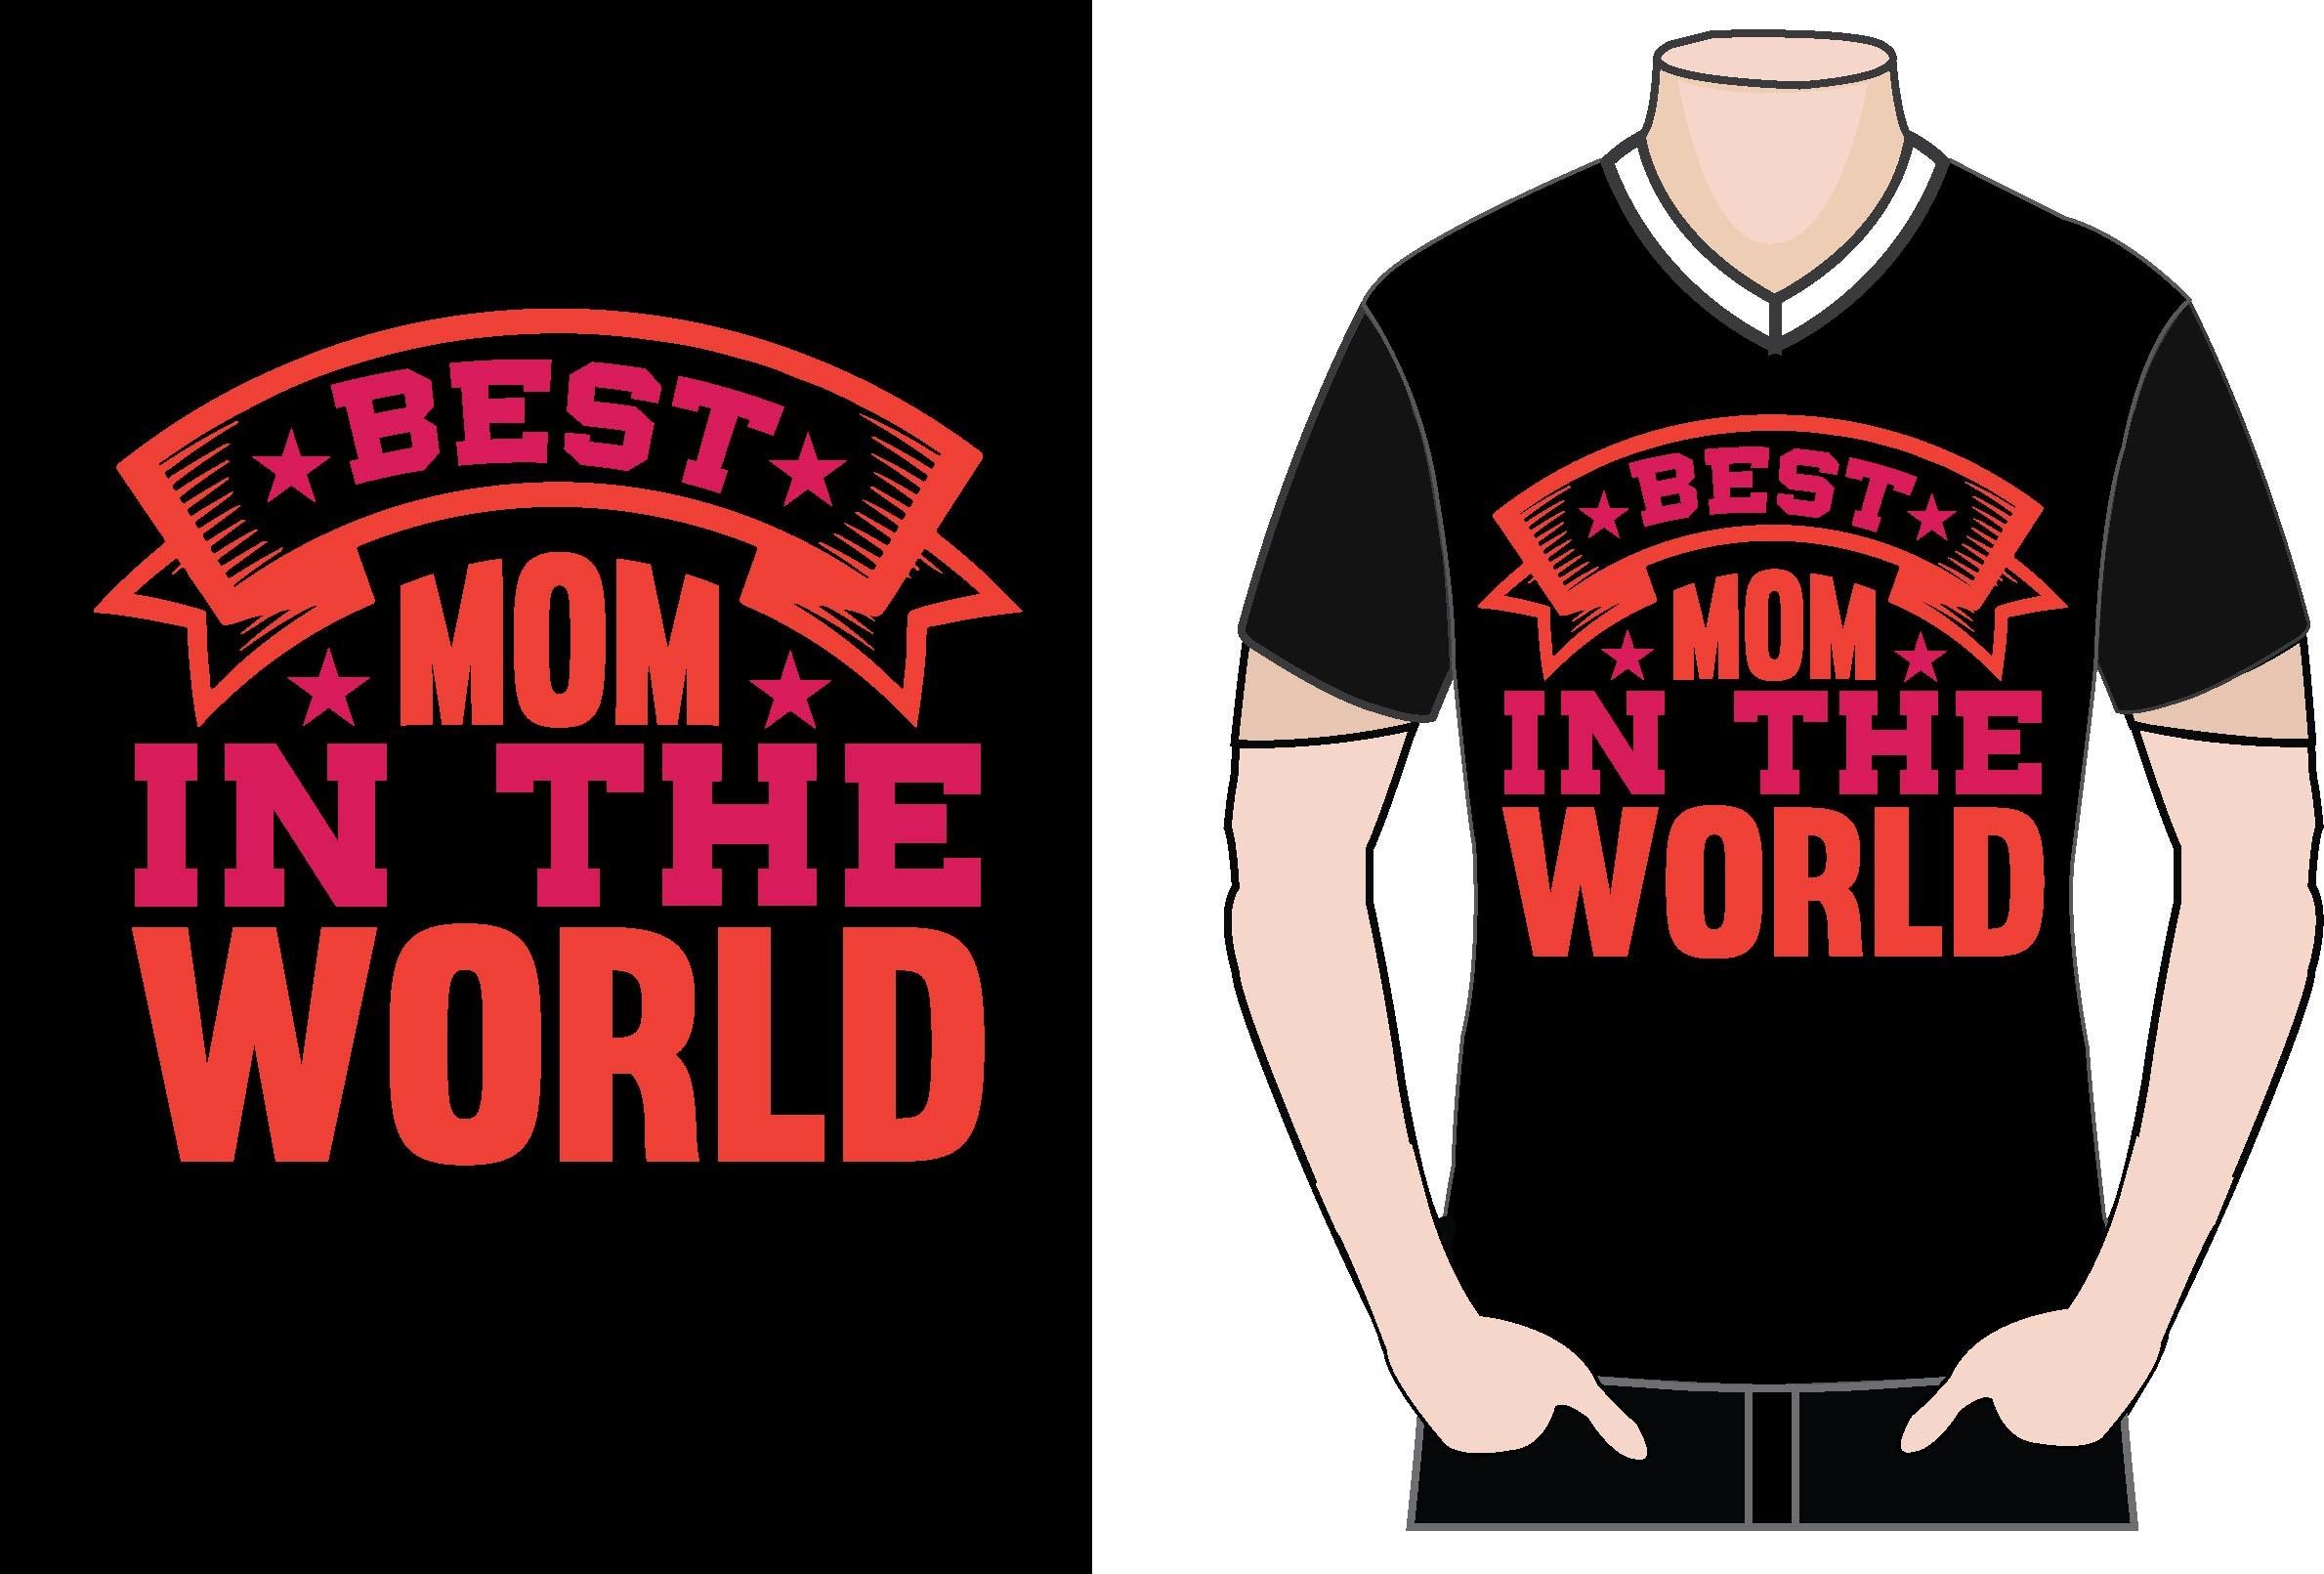 Best Mom in the World Tshirt